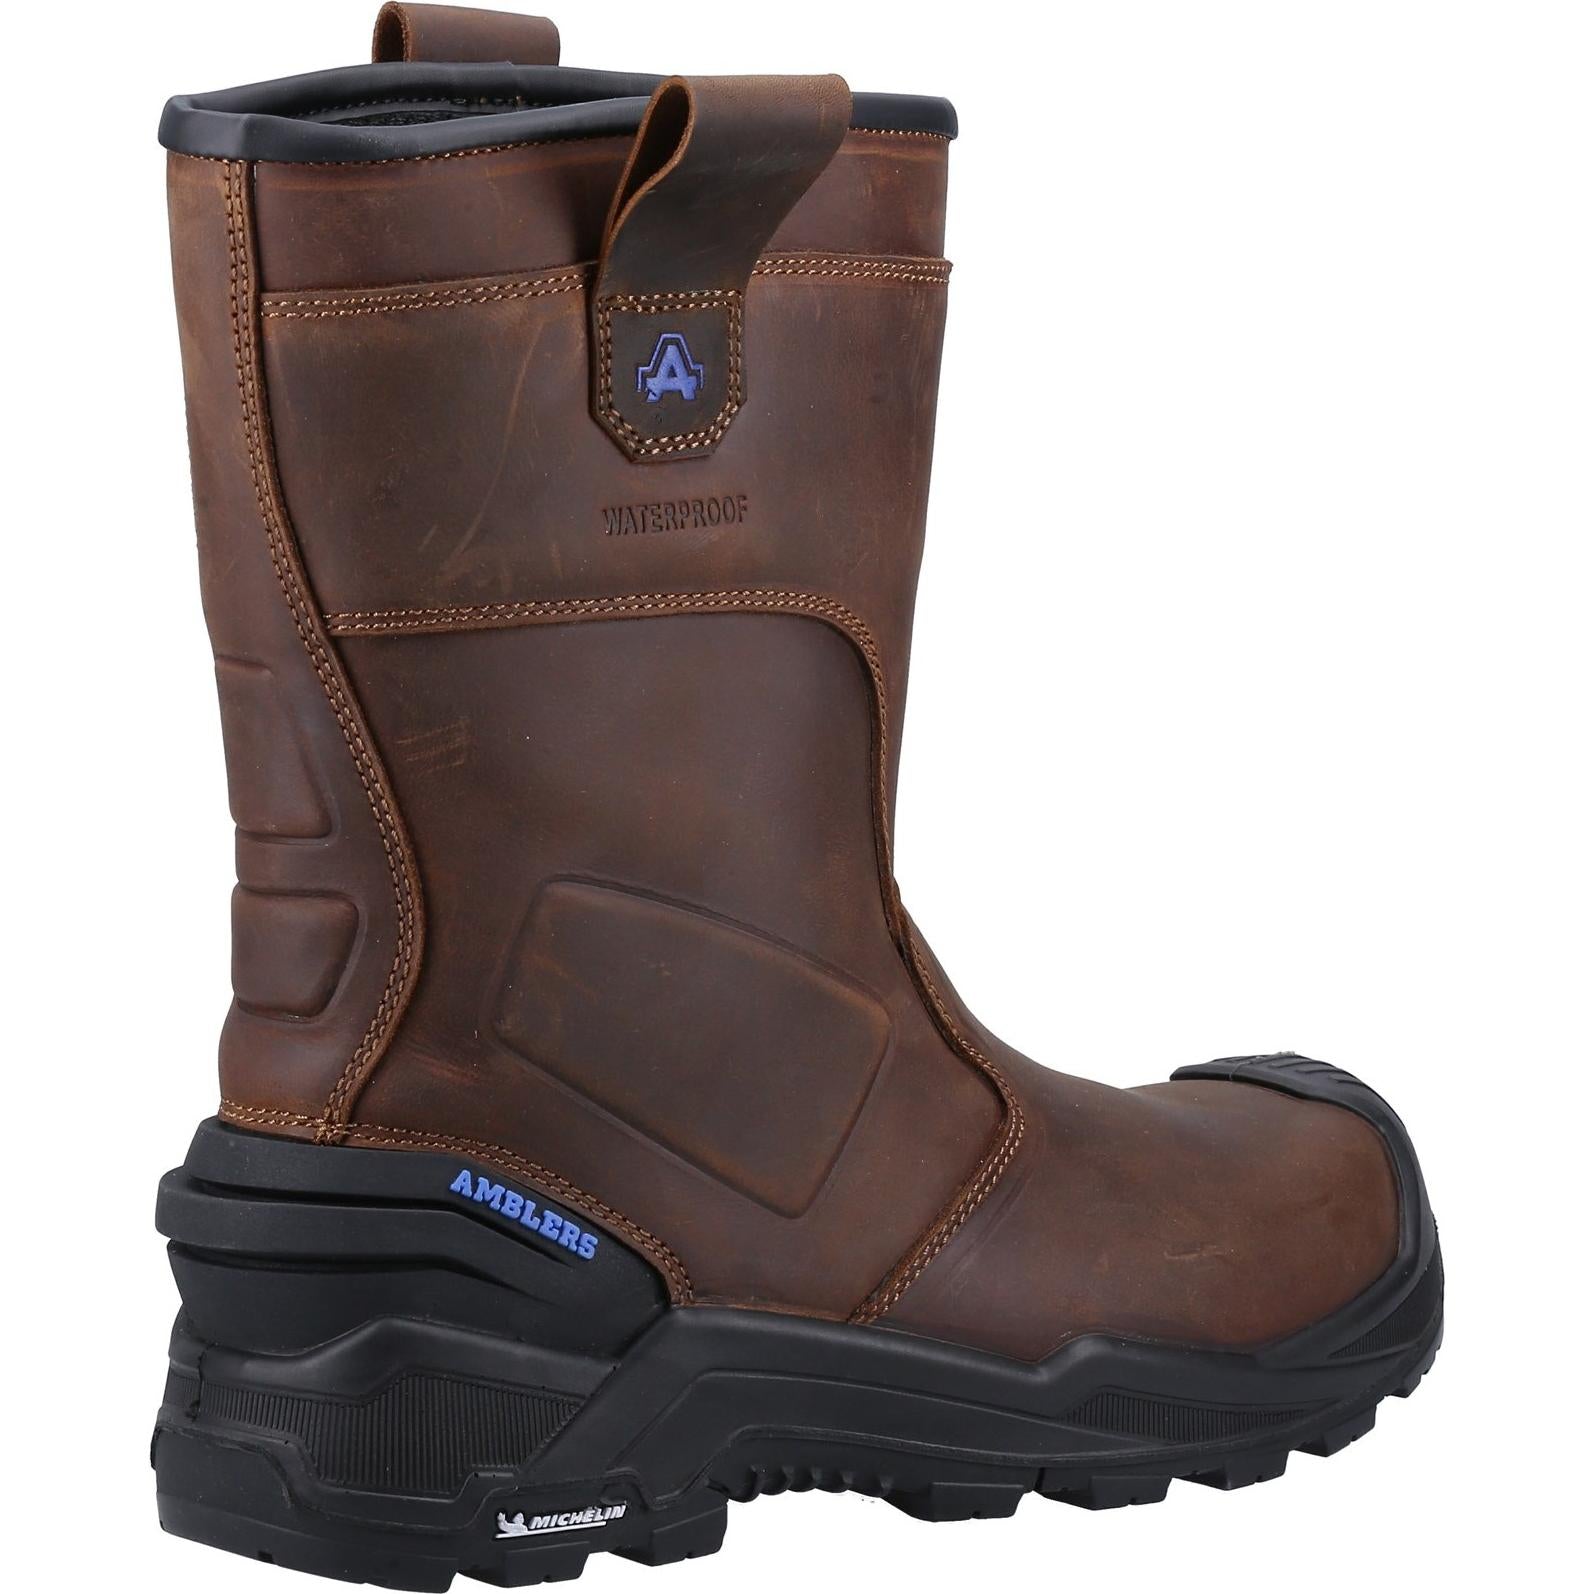 Amblers Safety 983C Rigger Boots